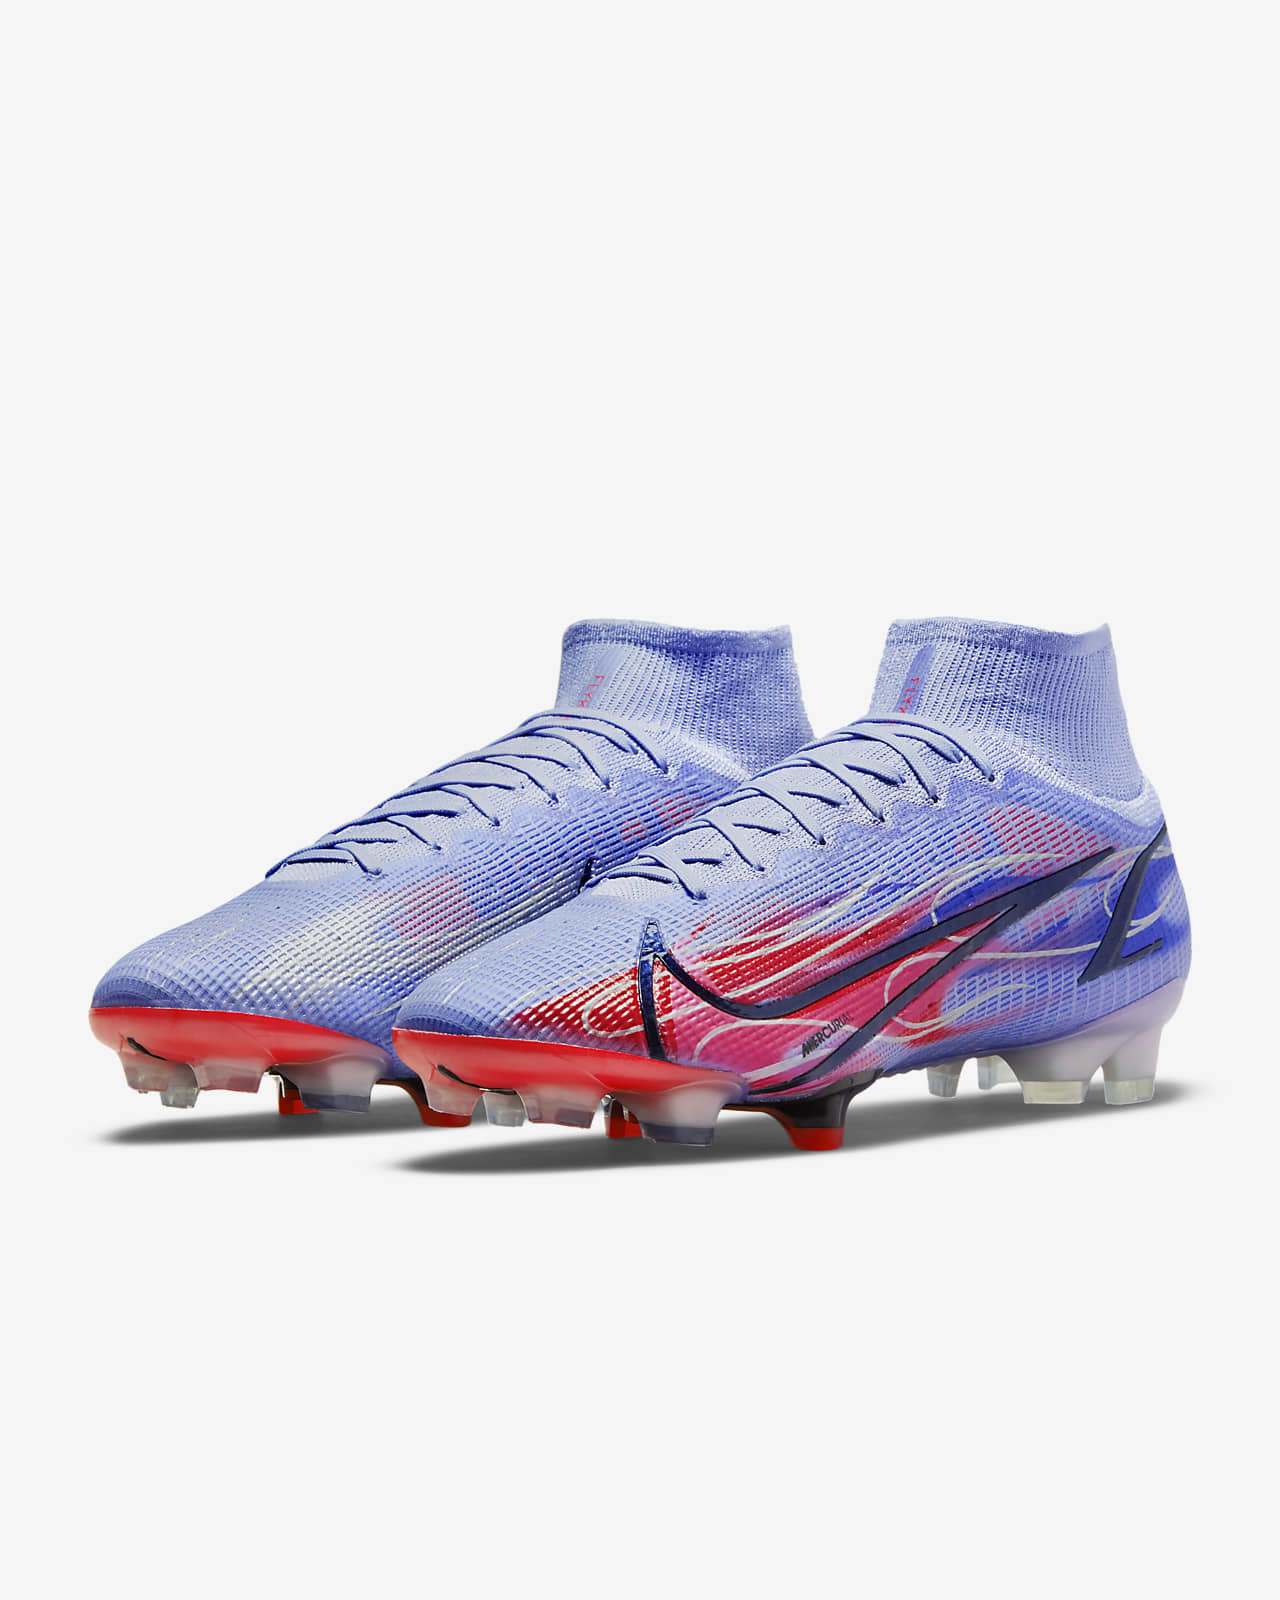 Nike Mercurial Superfly 8 Elite KM FG Firm-Ground Soccer Cleats 